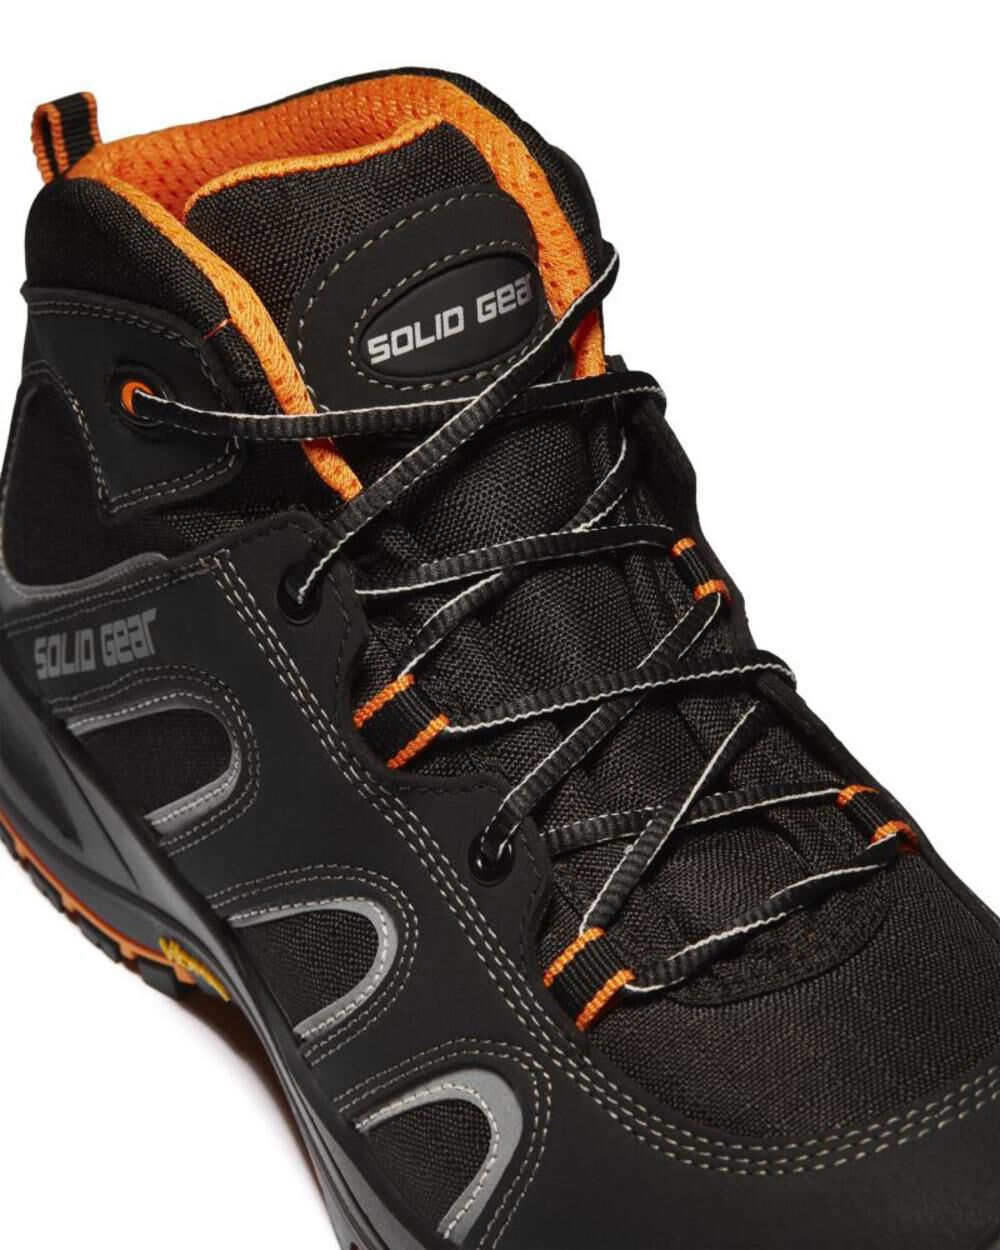 Gear Safety Shoes Falcon Size 12 SGUS73002120